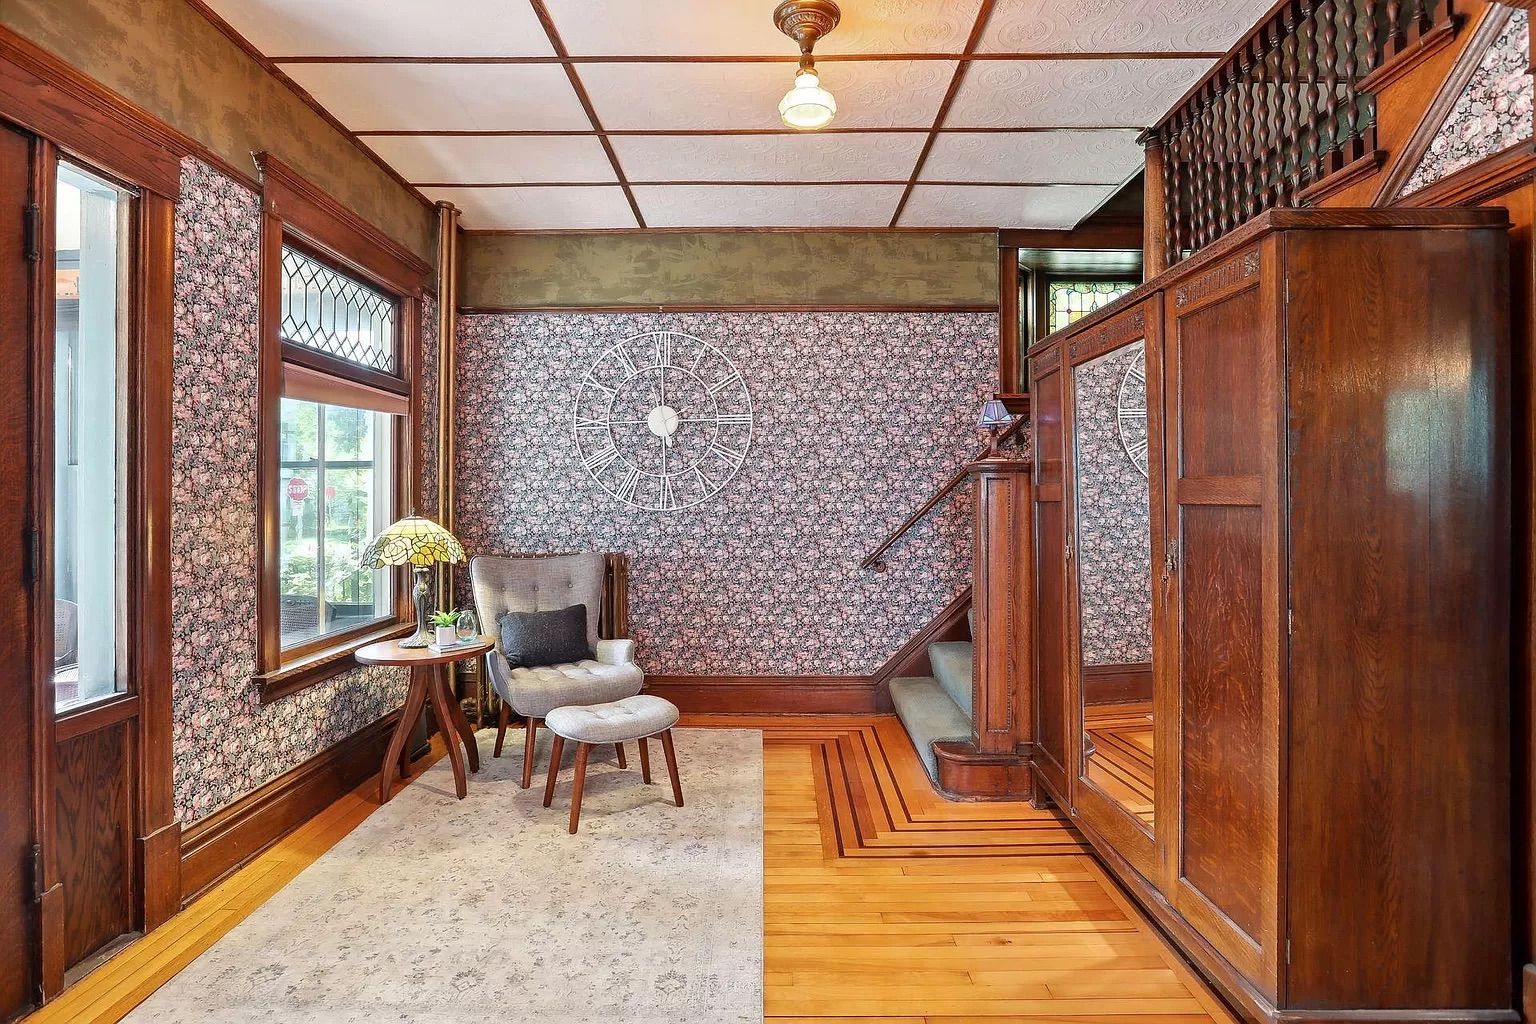 An entryway with colorful patterned wallpaper and wood accents.